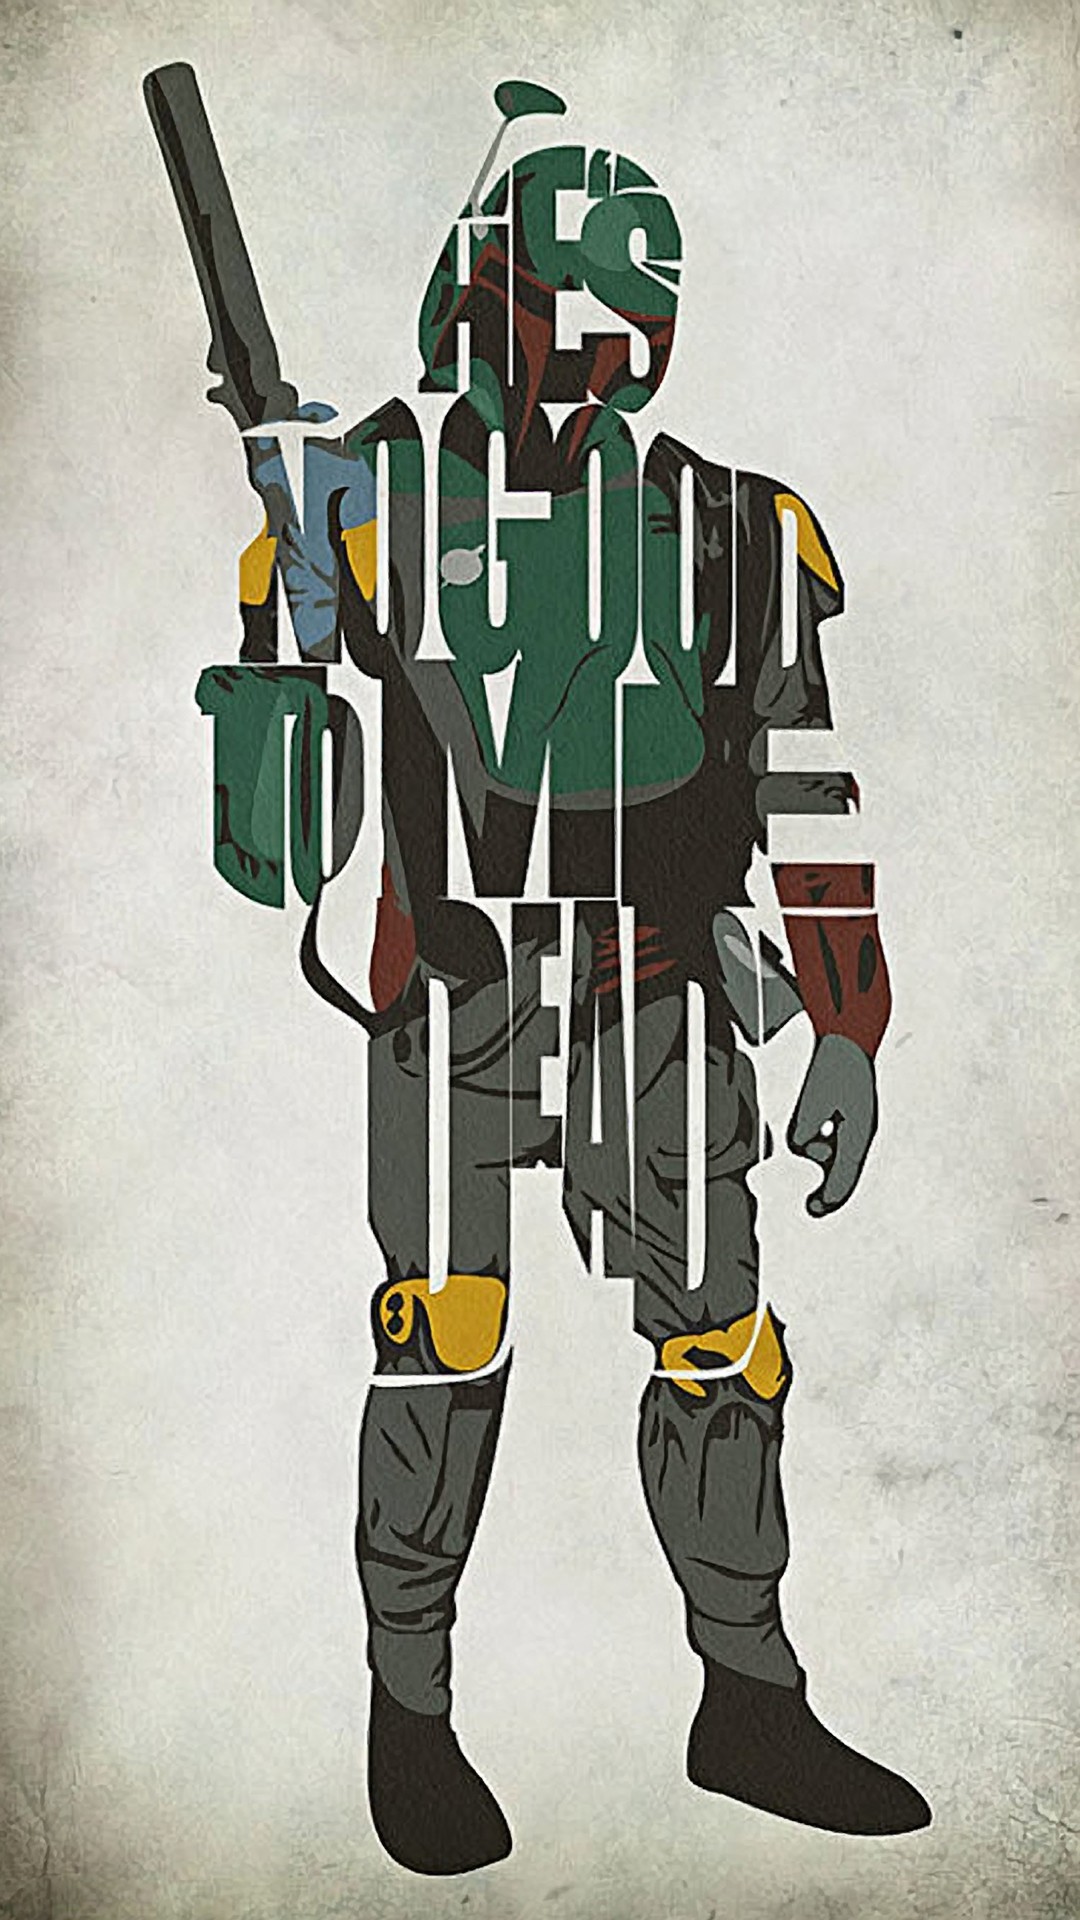 1080x1920 Star Wars Inspired Boba Fett Typography Artwork Painting by Ayse T Werner -  Star Wars Inspired Boba Fett Typography Artwork Fine Art Prints and Posters  for ...